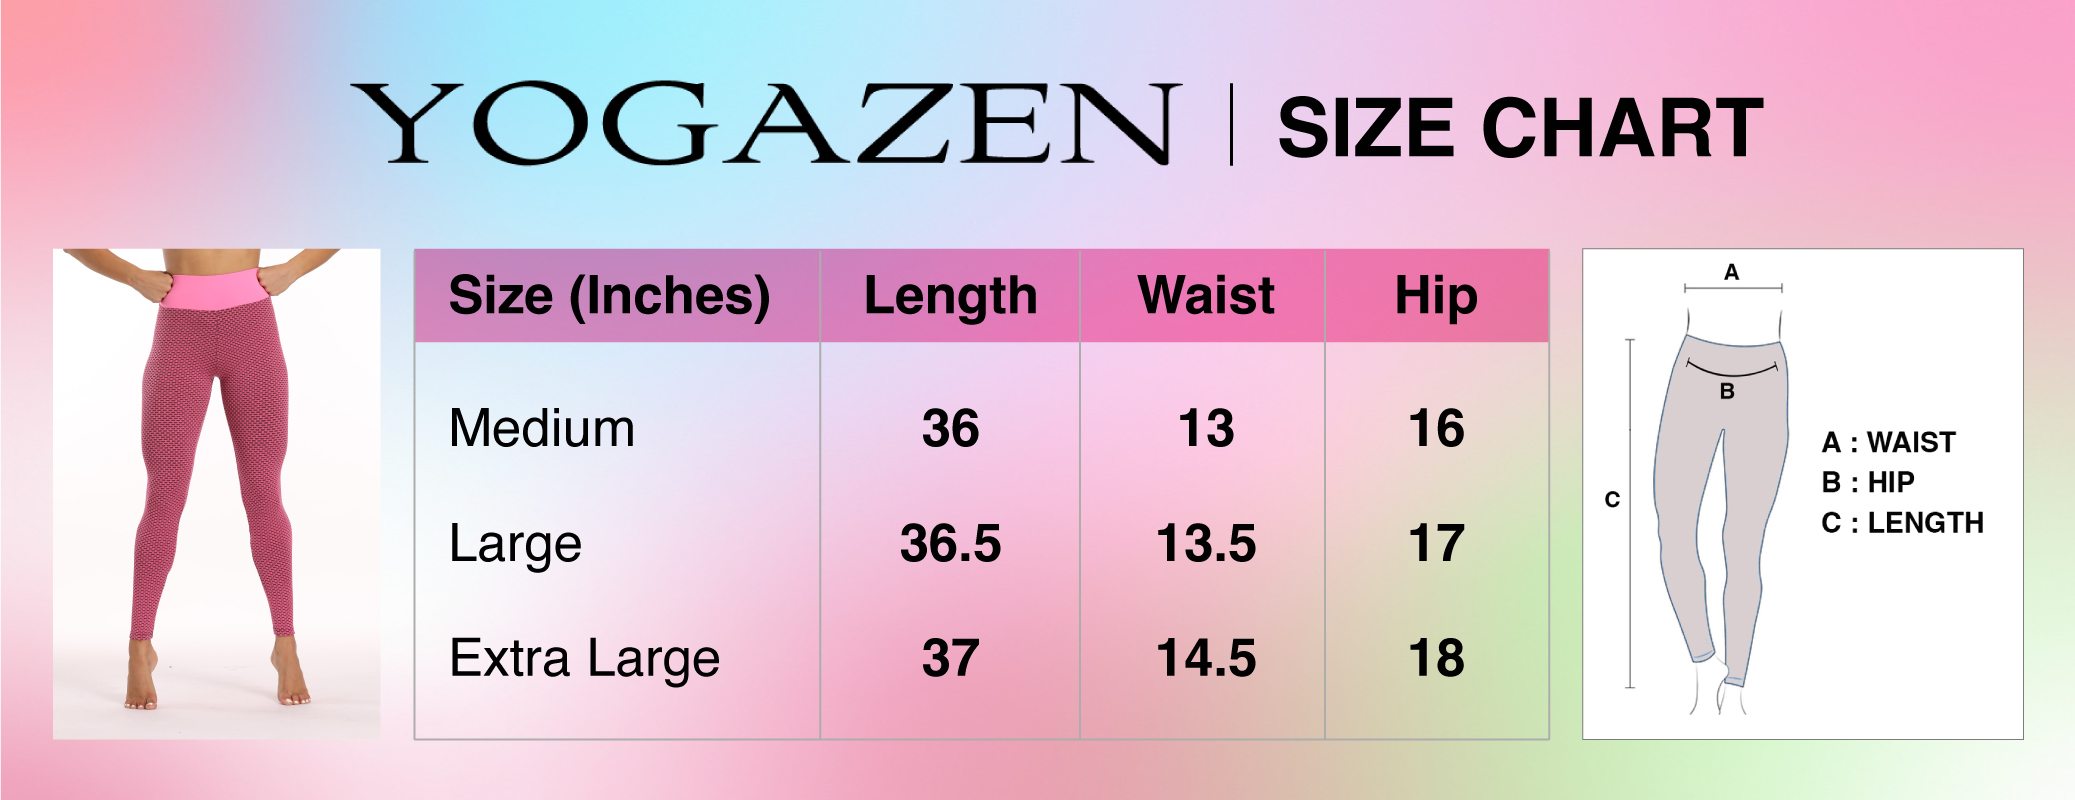 Women's Thick High Waist Yoga Exercise Stretch Stretch Pants Tummy Control Slimming Lifting Anti Cellulite Scrunch Booty Leggings Ruched Butt Textured Tights Sport Workout - image 4 of 8